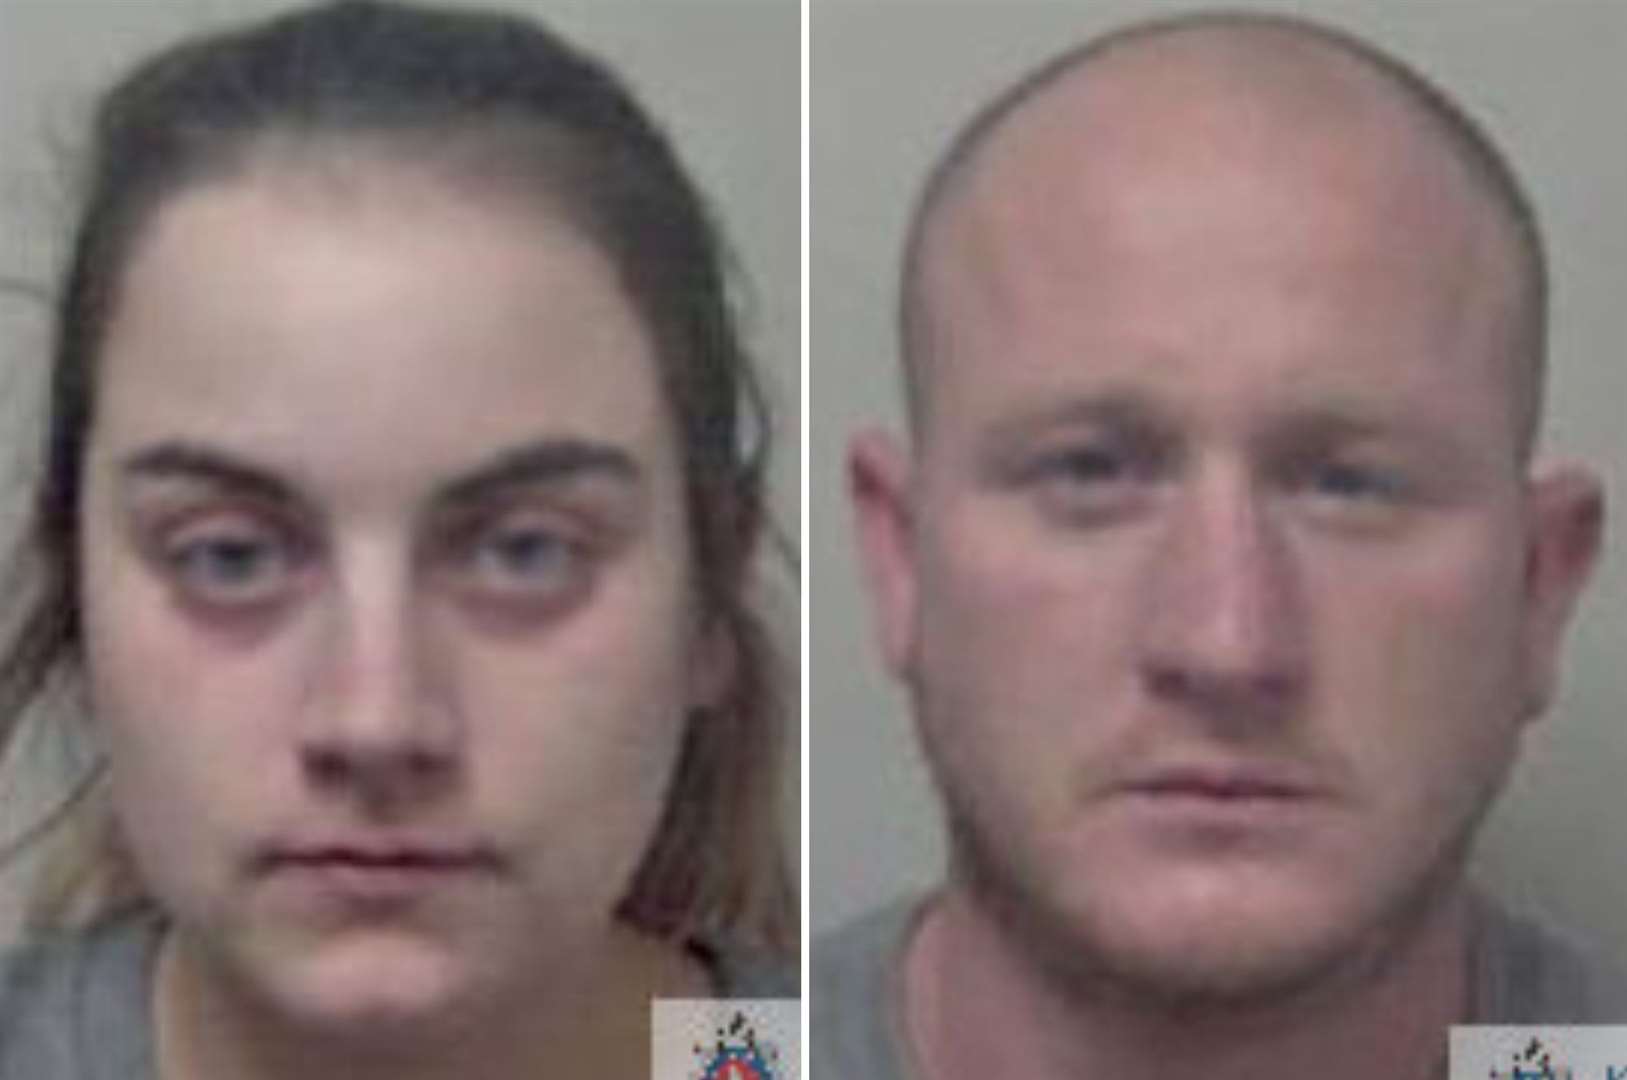 Sian Hedges and Jack Benham were found guilty of the murder of 18-month-old Alfie PhillipsPicture: Kent Police